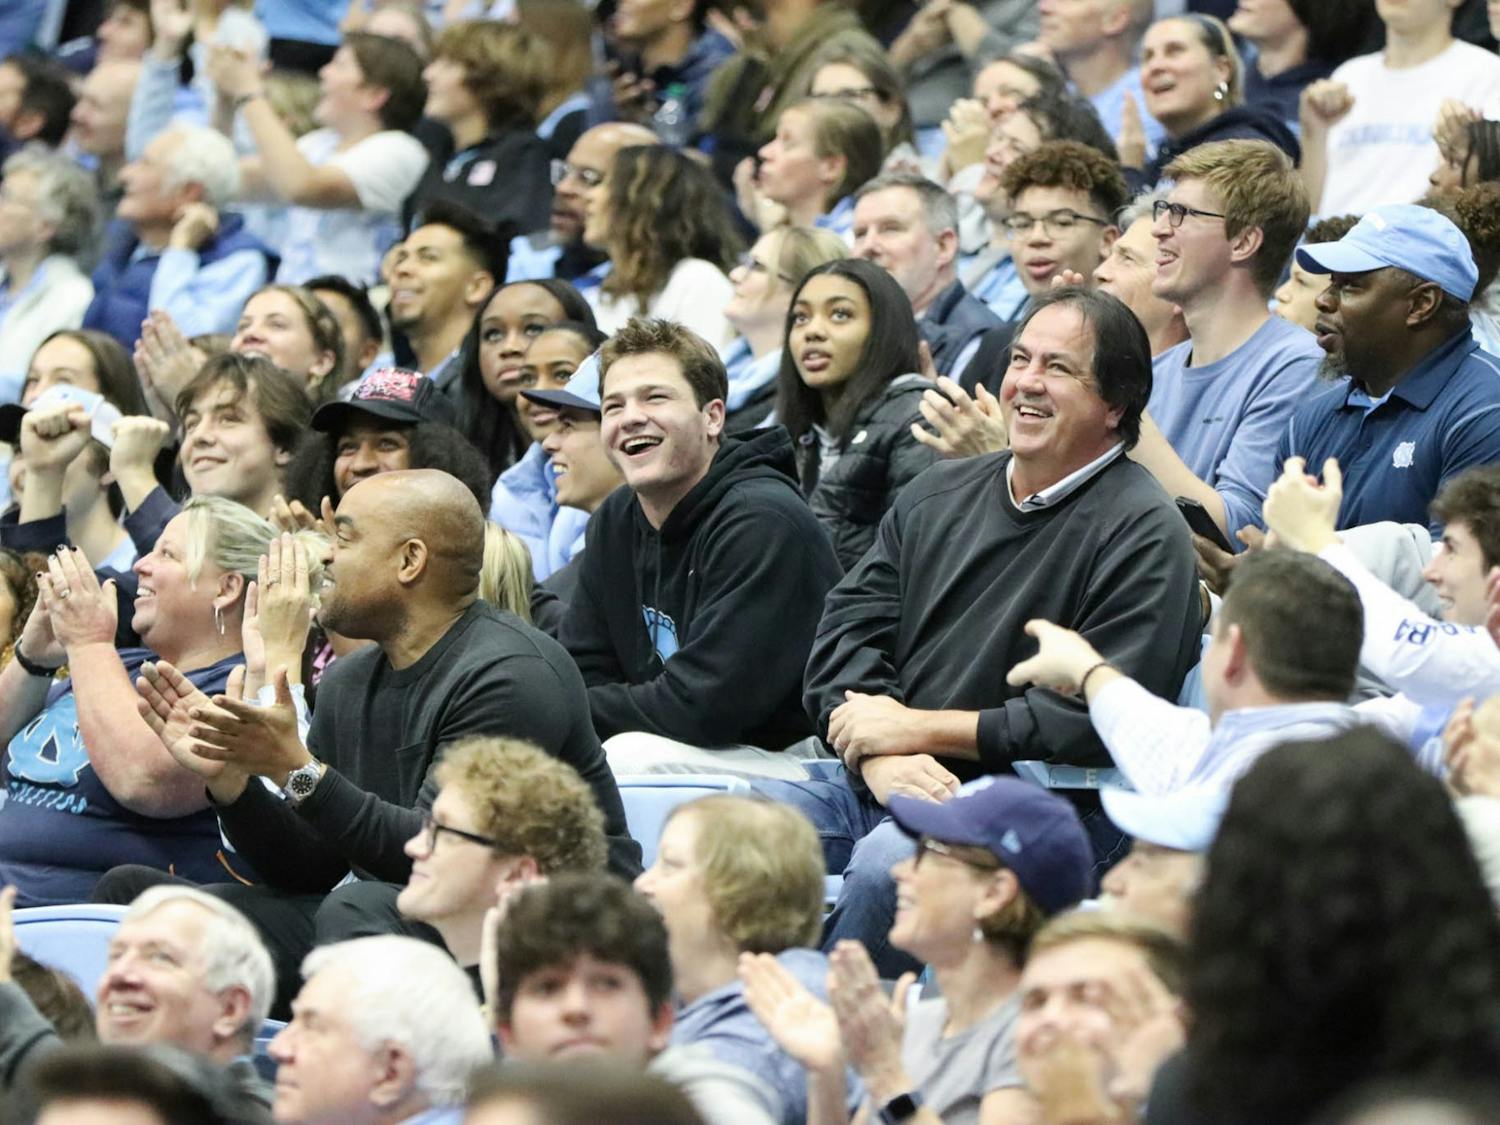 UNC first-year quarterback Drake Maye and his father, Mark Maye, smile in the crowd during the men's basketball game against Gardner-Webb at the Dean Smith Center on Tuesday, Nov. 15, 2022. UNC beat Gardner-Webb 72-66.